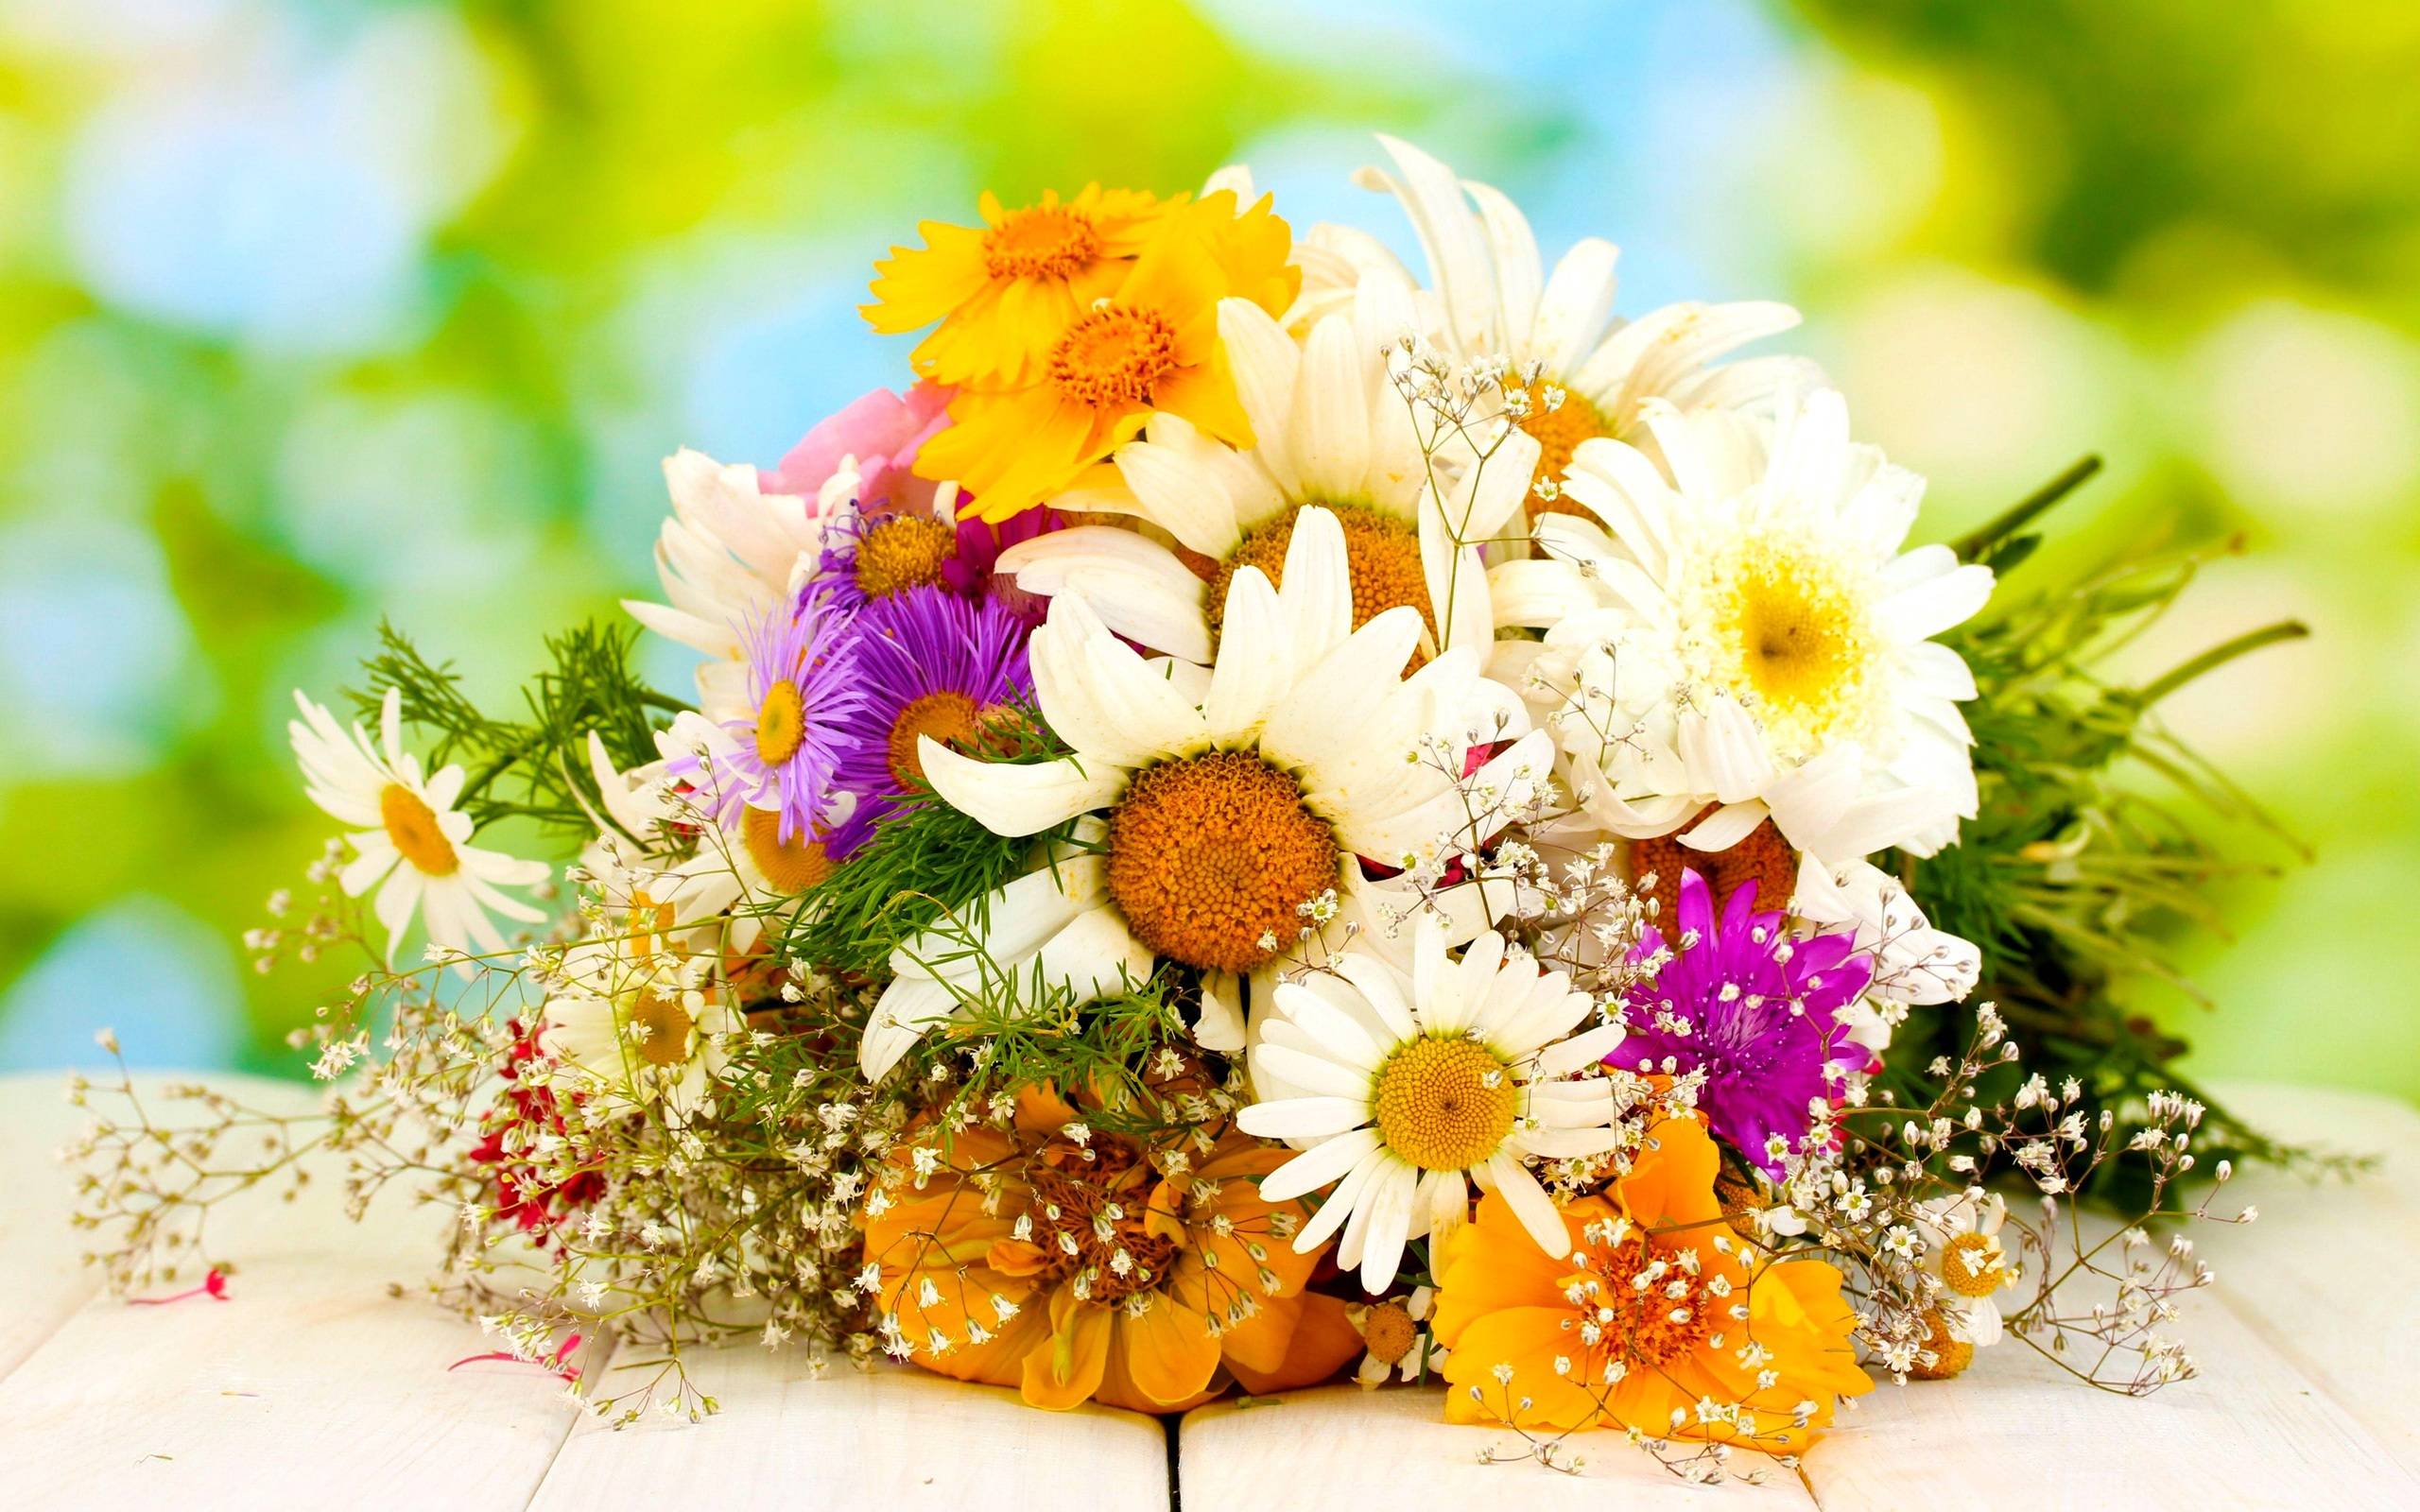 Flowers Boutique – Welcome to Our Flowers Boutique!